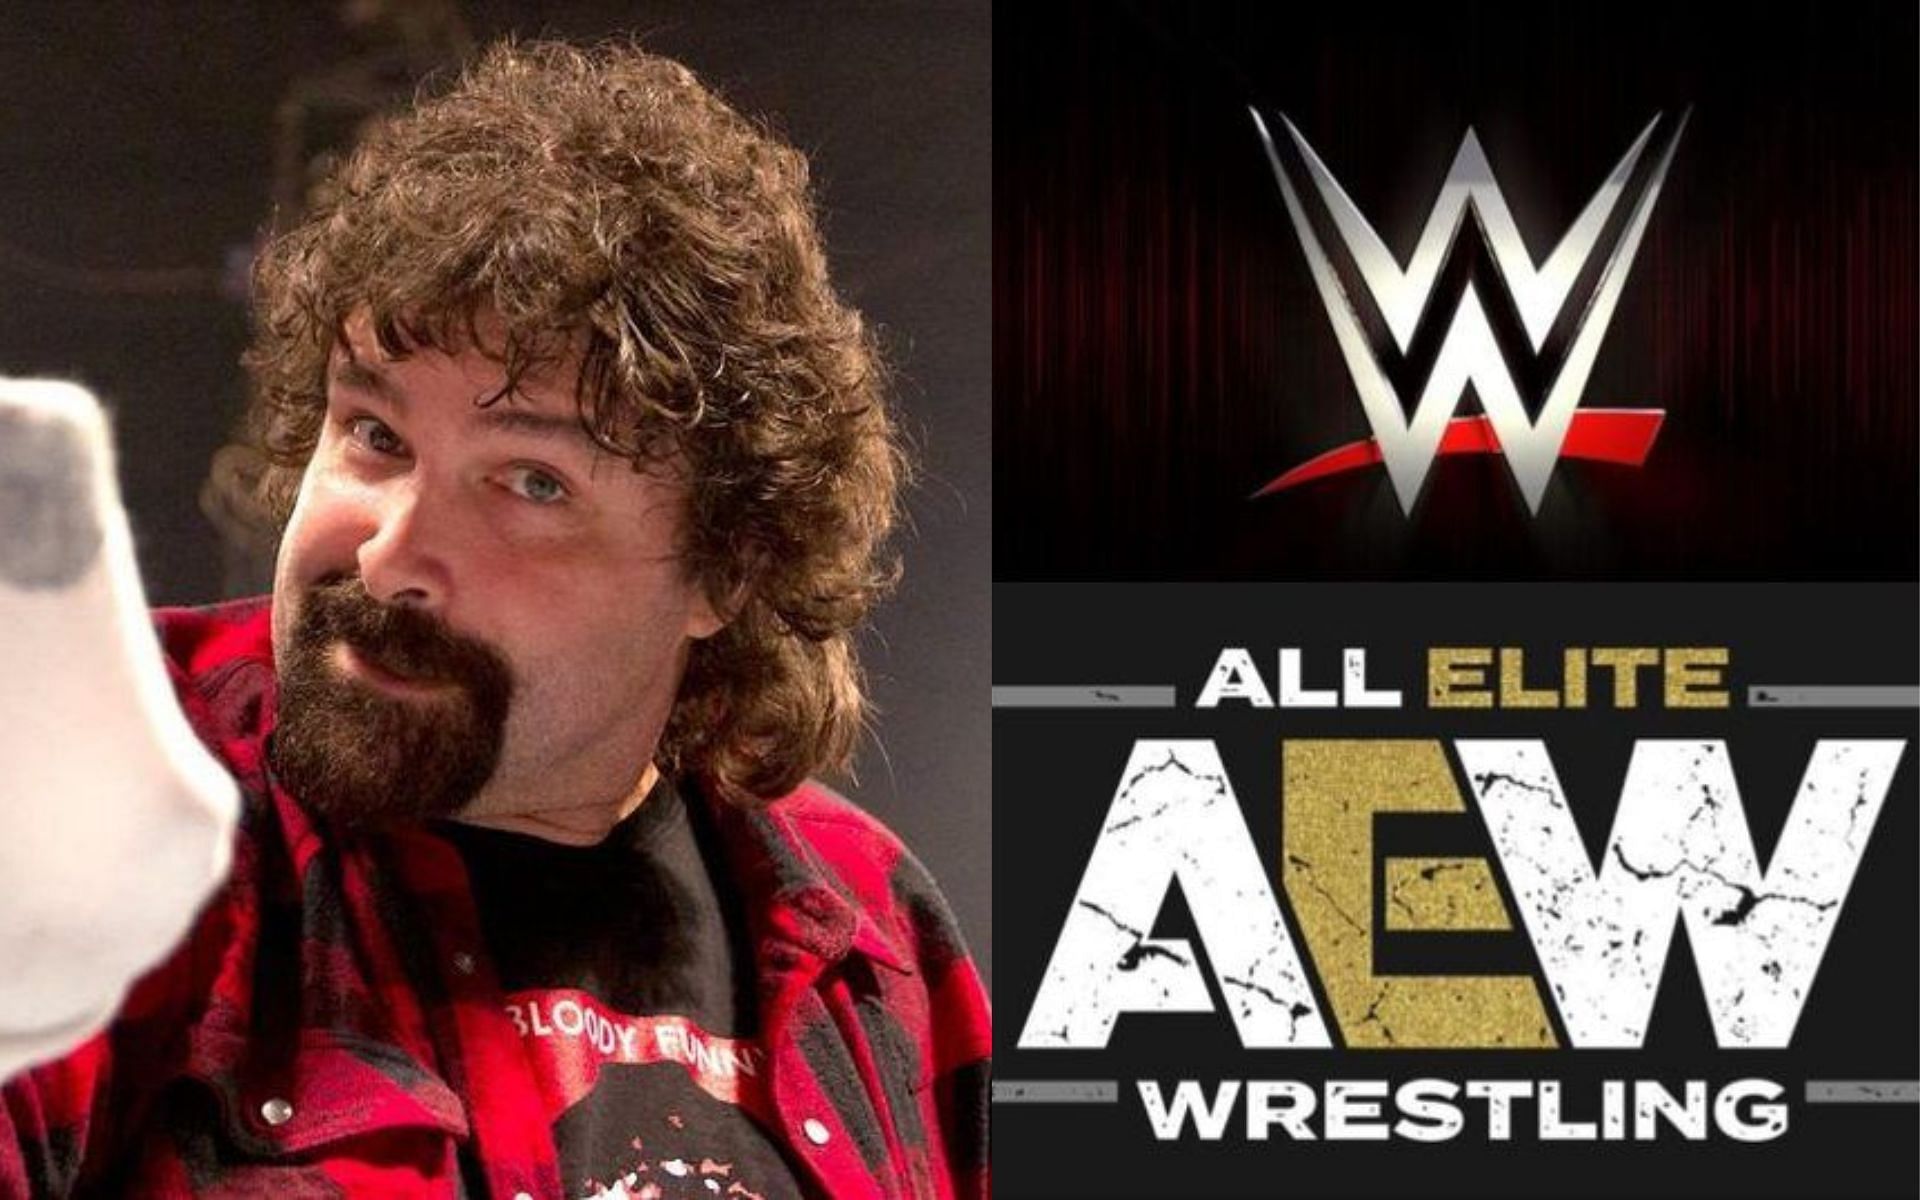 Mick Foley (left) and AEW and WWE logos (right).